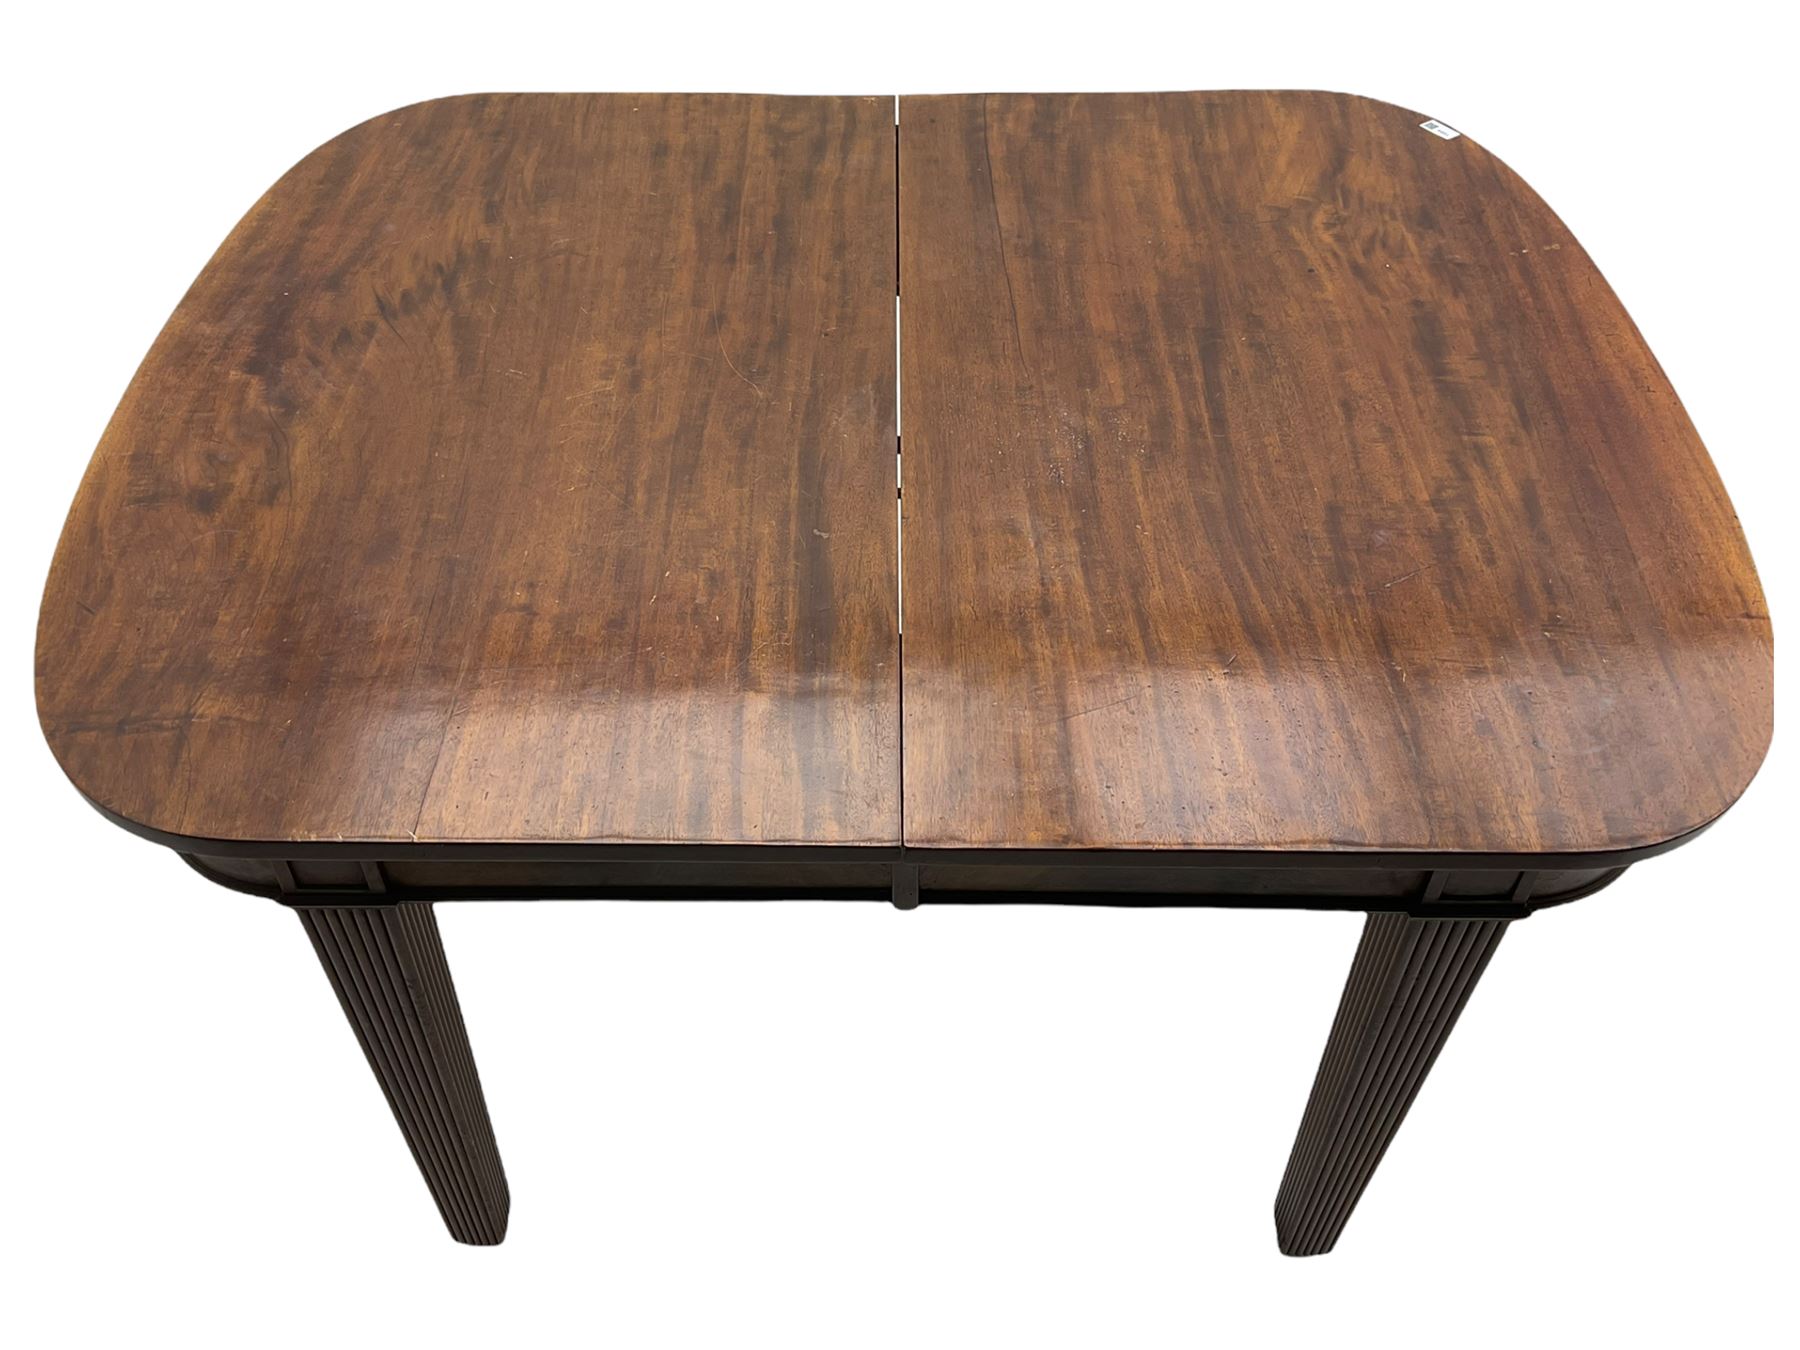 19th century mahogany extending dining table with leaf - Image 2 of 11